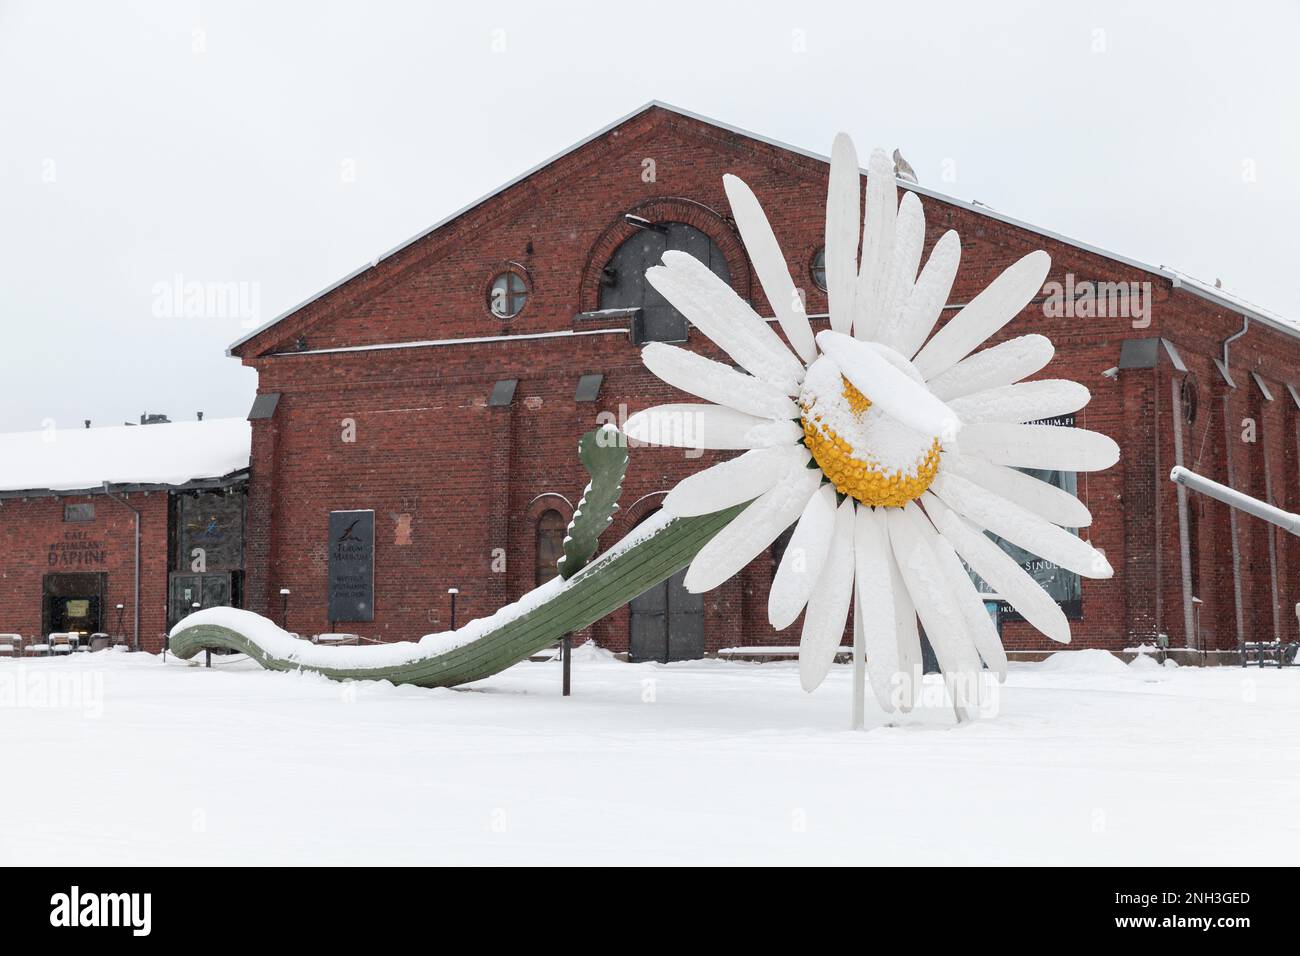 Turku, Finland - January 17, 2016: Giant chamomile flower installation in front of Forum Marinum Stock Photo